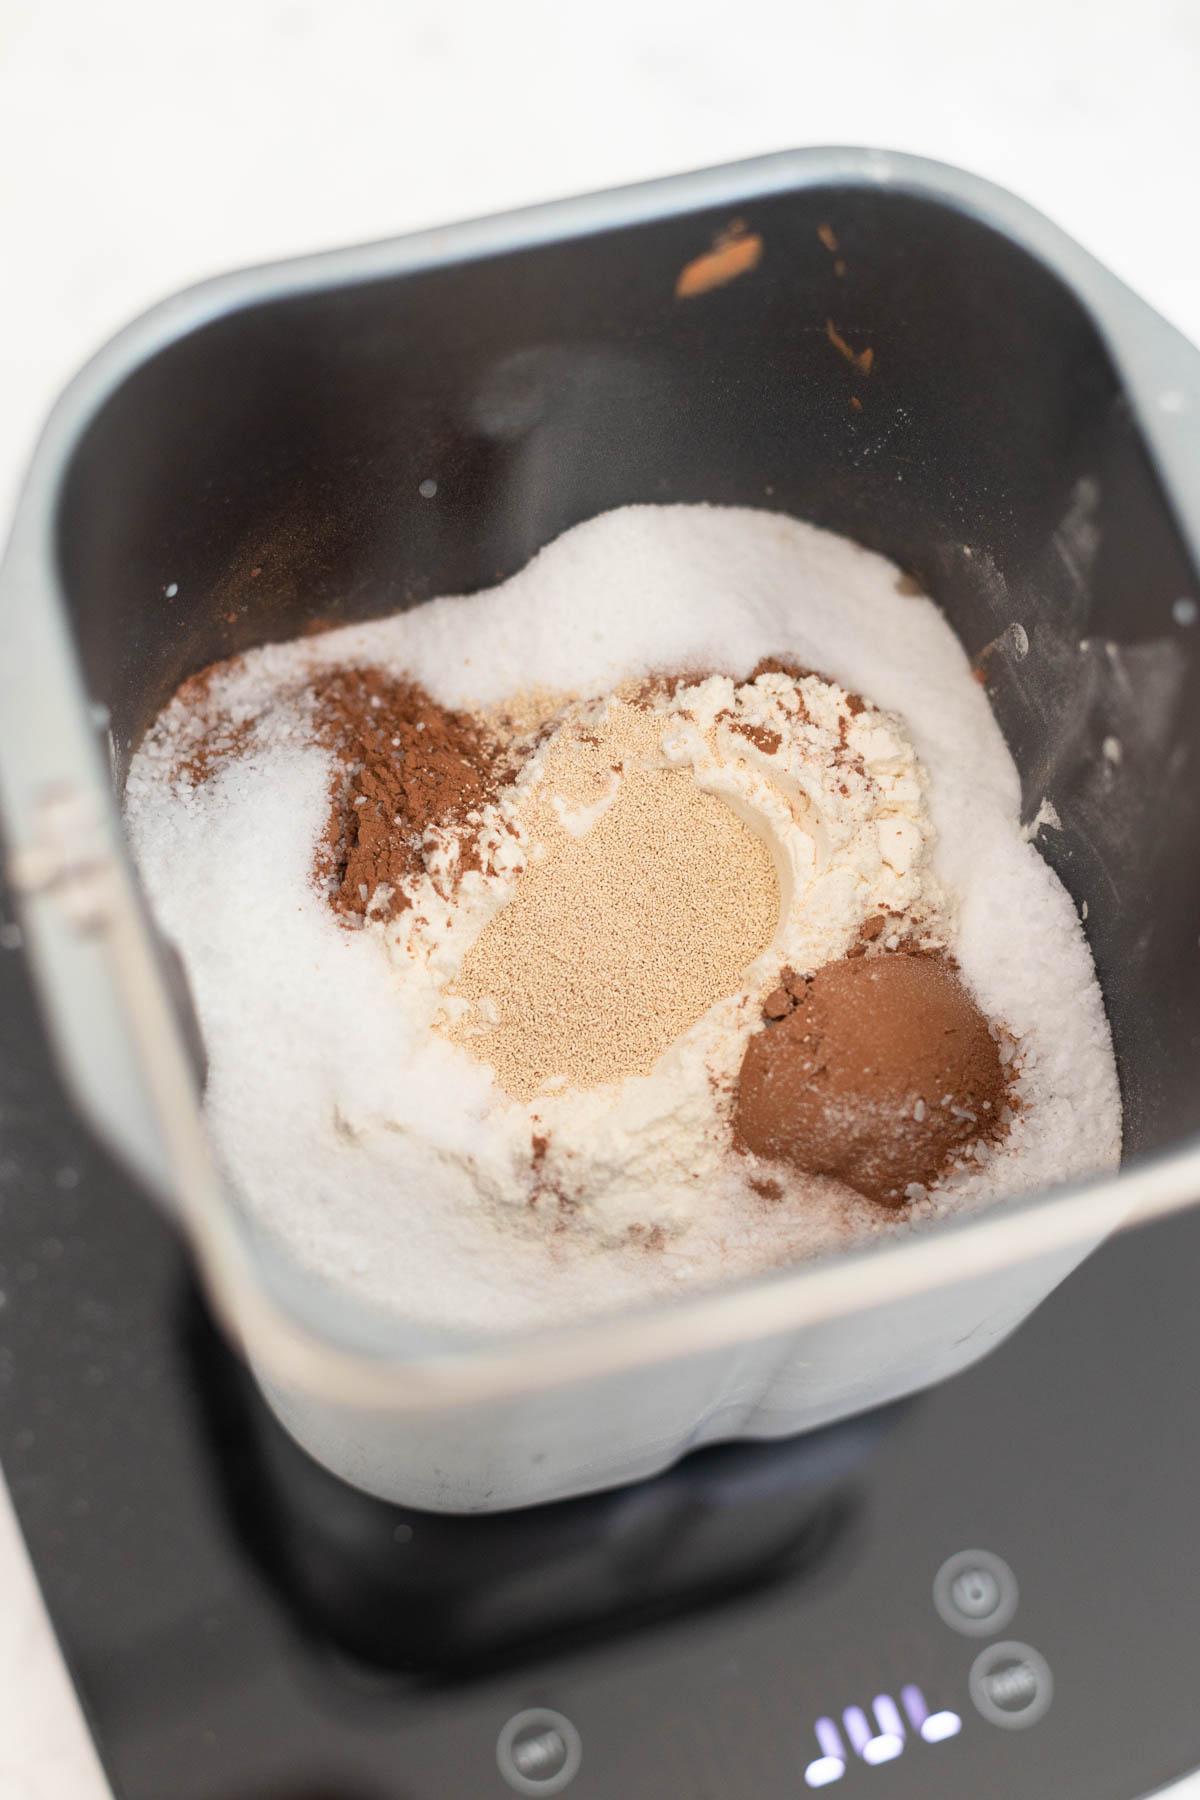 The flour, cocoa powder, and yeast are in the bread pan.